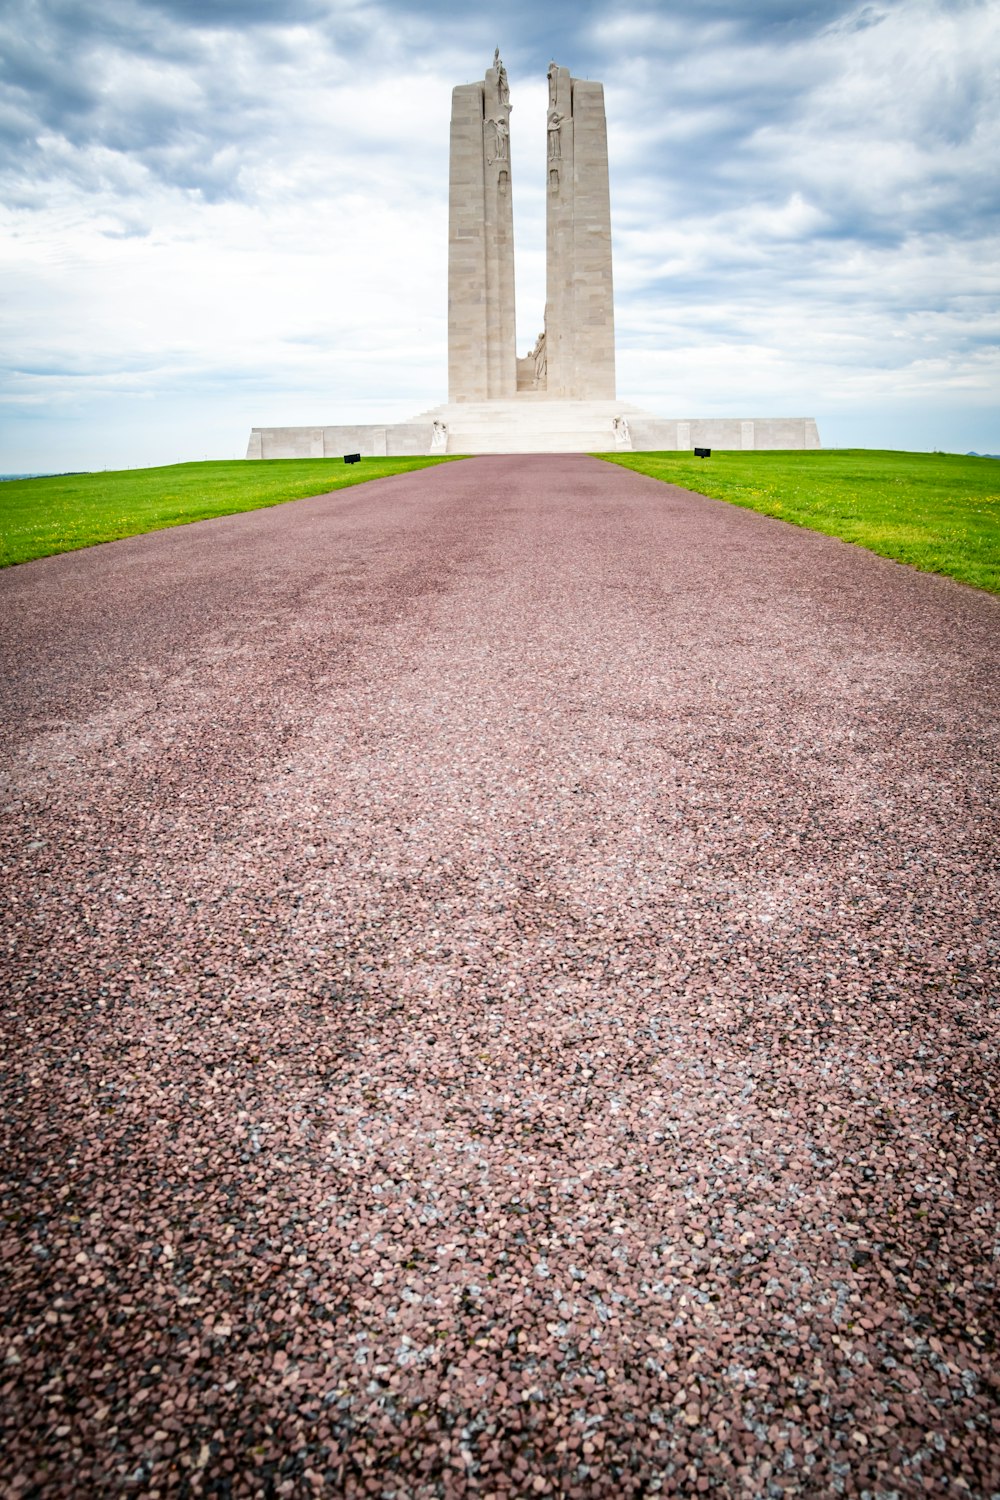 a large monument sitting on top of a lush green field